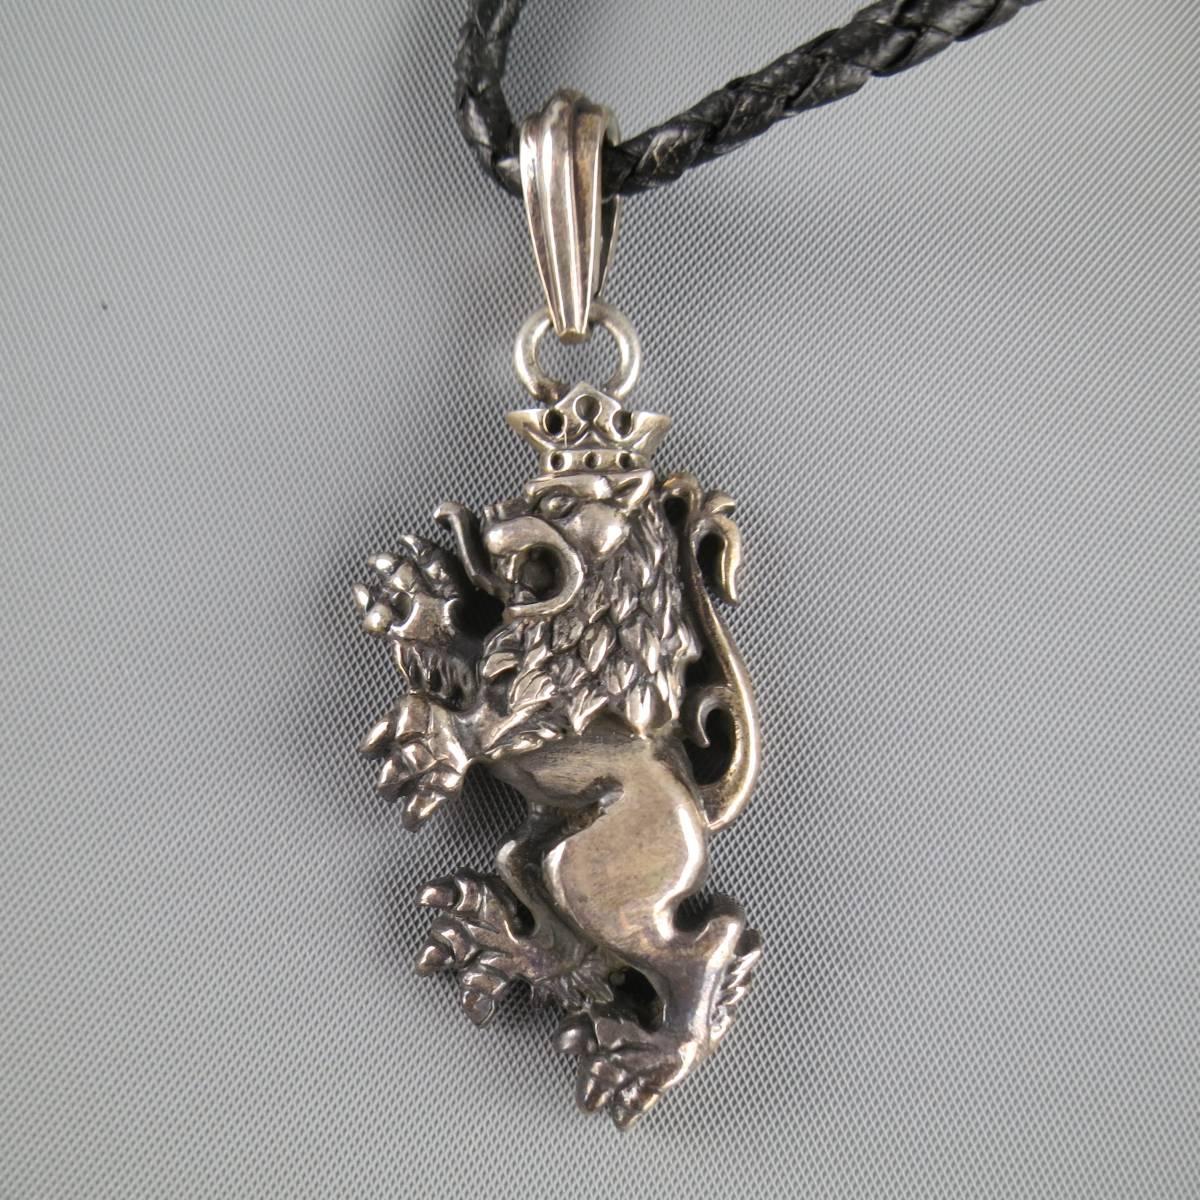 Royal Underground necklace features a sterling silver engraved lion charm on a black braided leather rope. Wear throughout leather. With Box.
 
Excellent Pre-Owned Condition.
 
Necklace: 25 in.
Charm: 5 x 3 cm.


Web ID: 81360 
